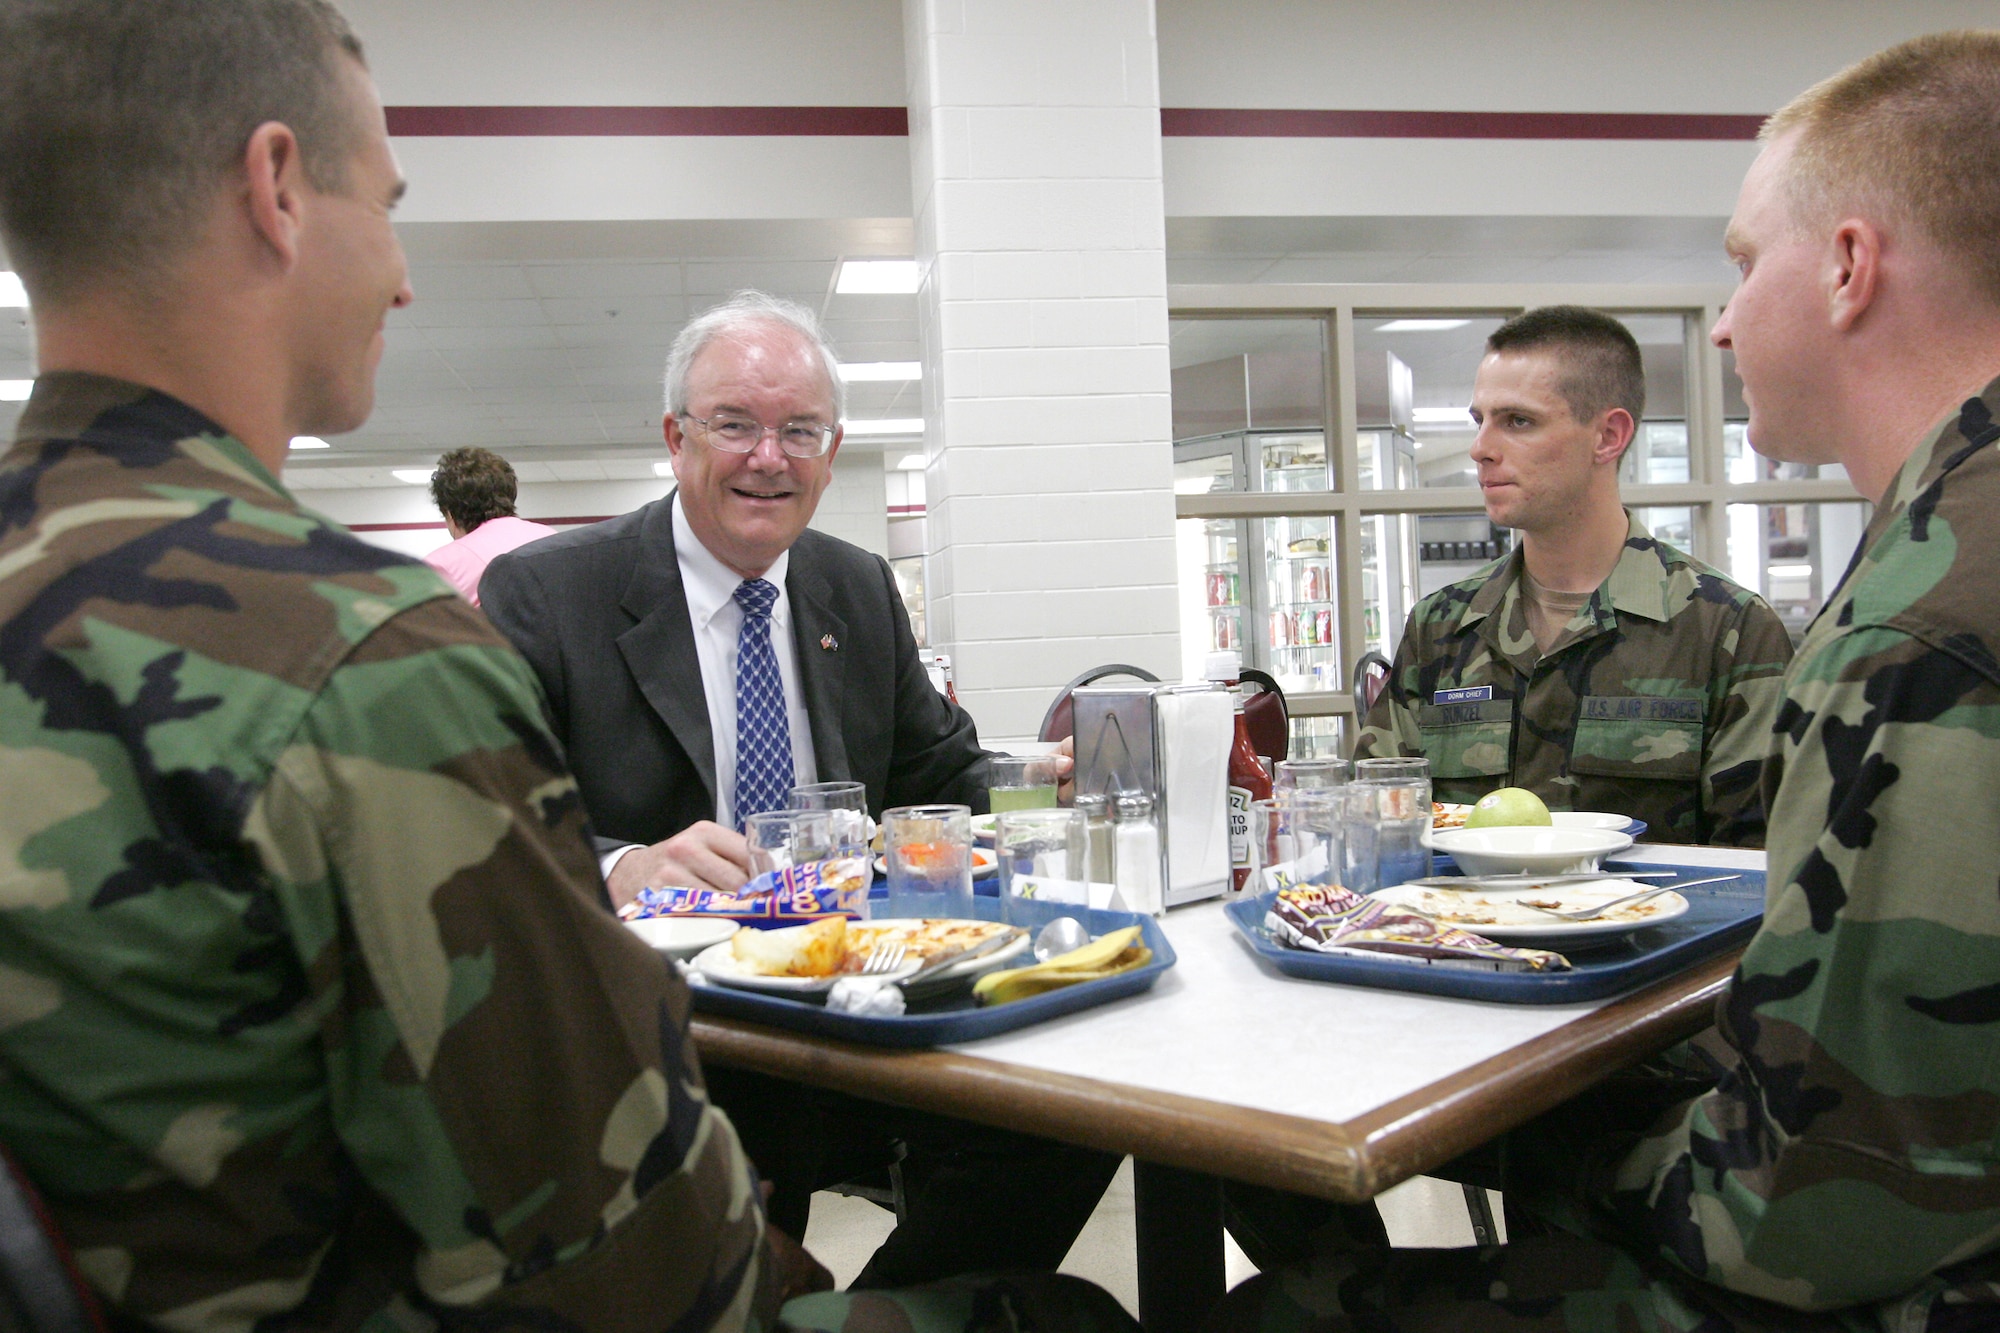 LACKLAND AIR FORCE BASE, Texas (AETCNS) Secretary of the Air Force Michael W. Wynne has lunch with fifth week basic trainees at the 326th Training Squadron here June 2. Airman Basic Bradford Herzog (left) and Airman Basic Bradley Cline are from flight 437, and Airman Basic Jacob Runzel is element leader for flight 438.